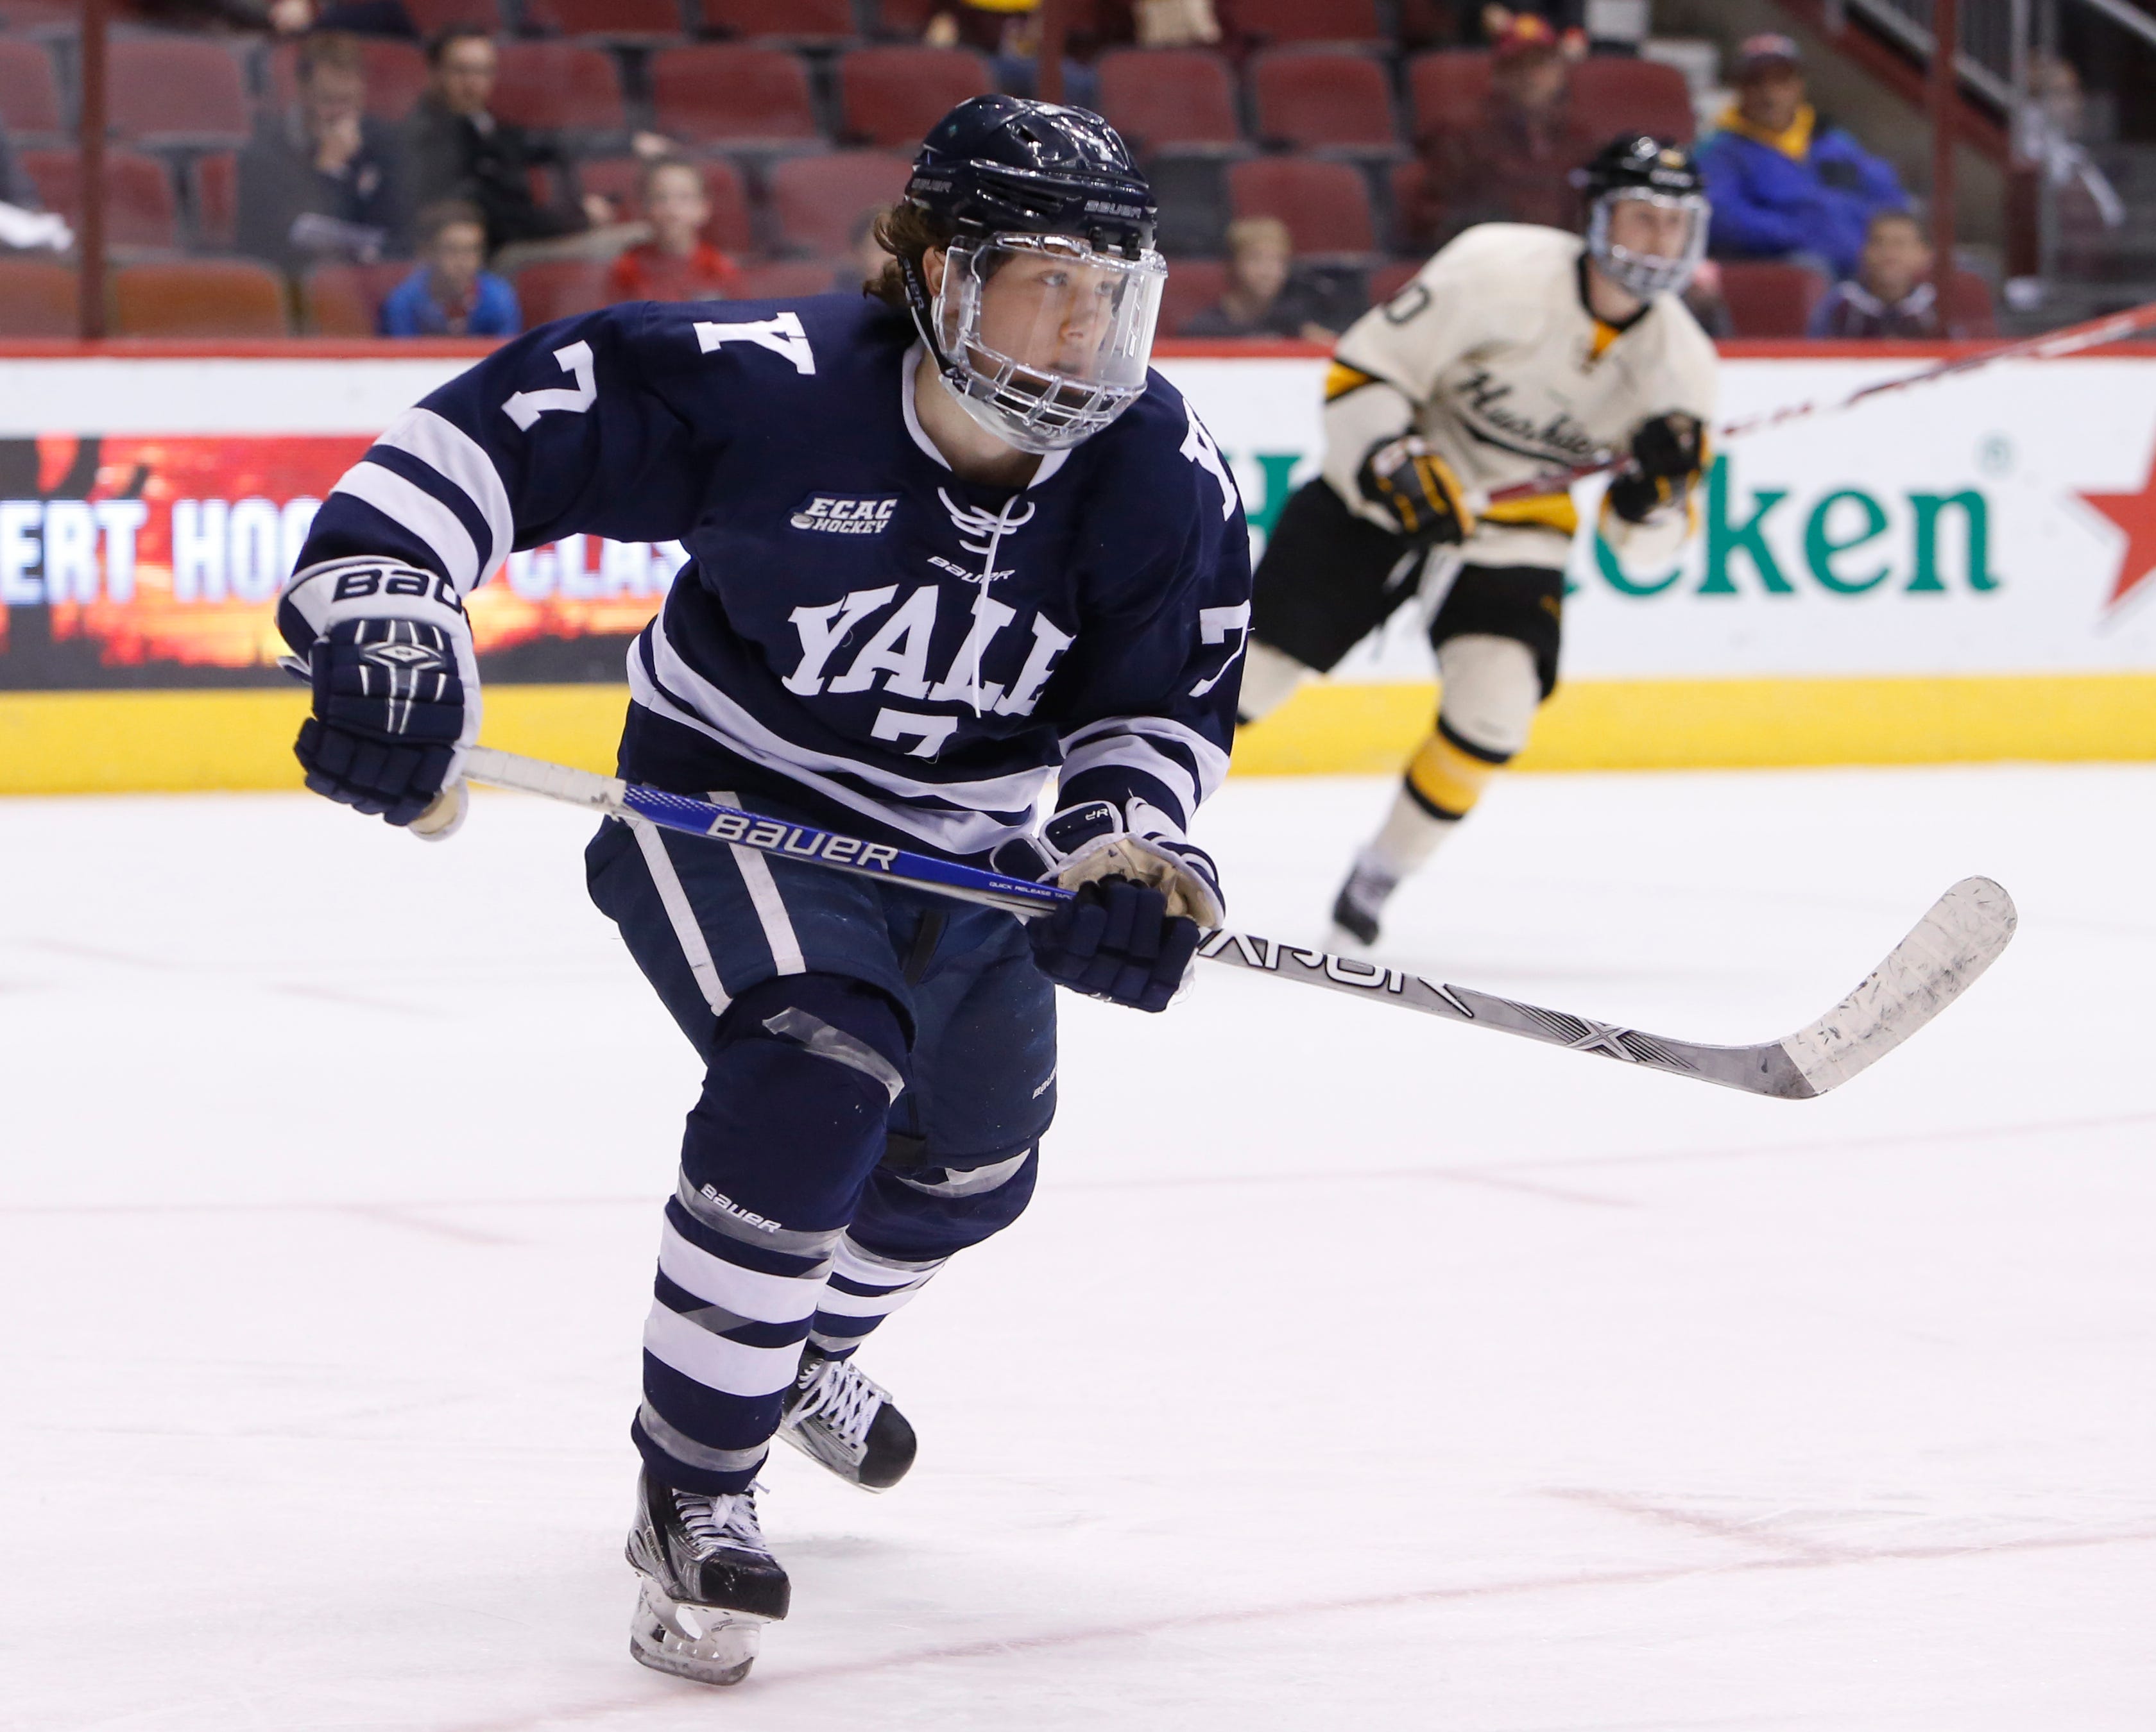 Capitals sign local product Joe Snively of Yale